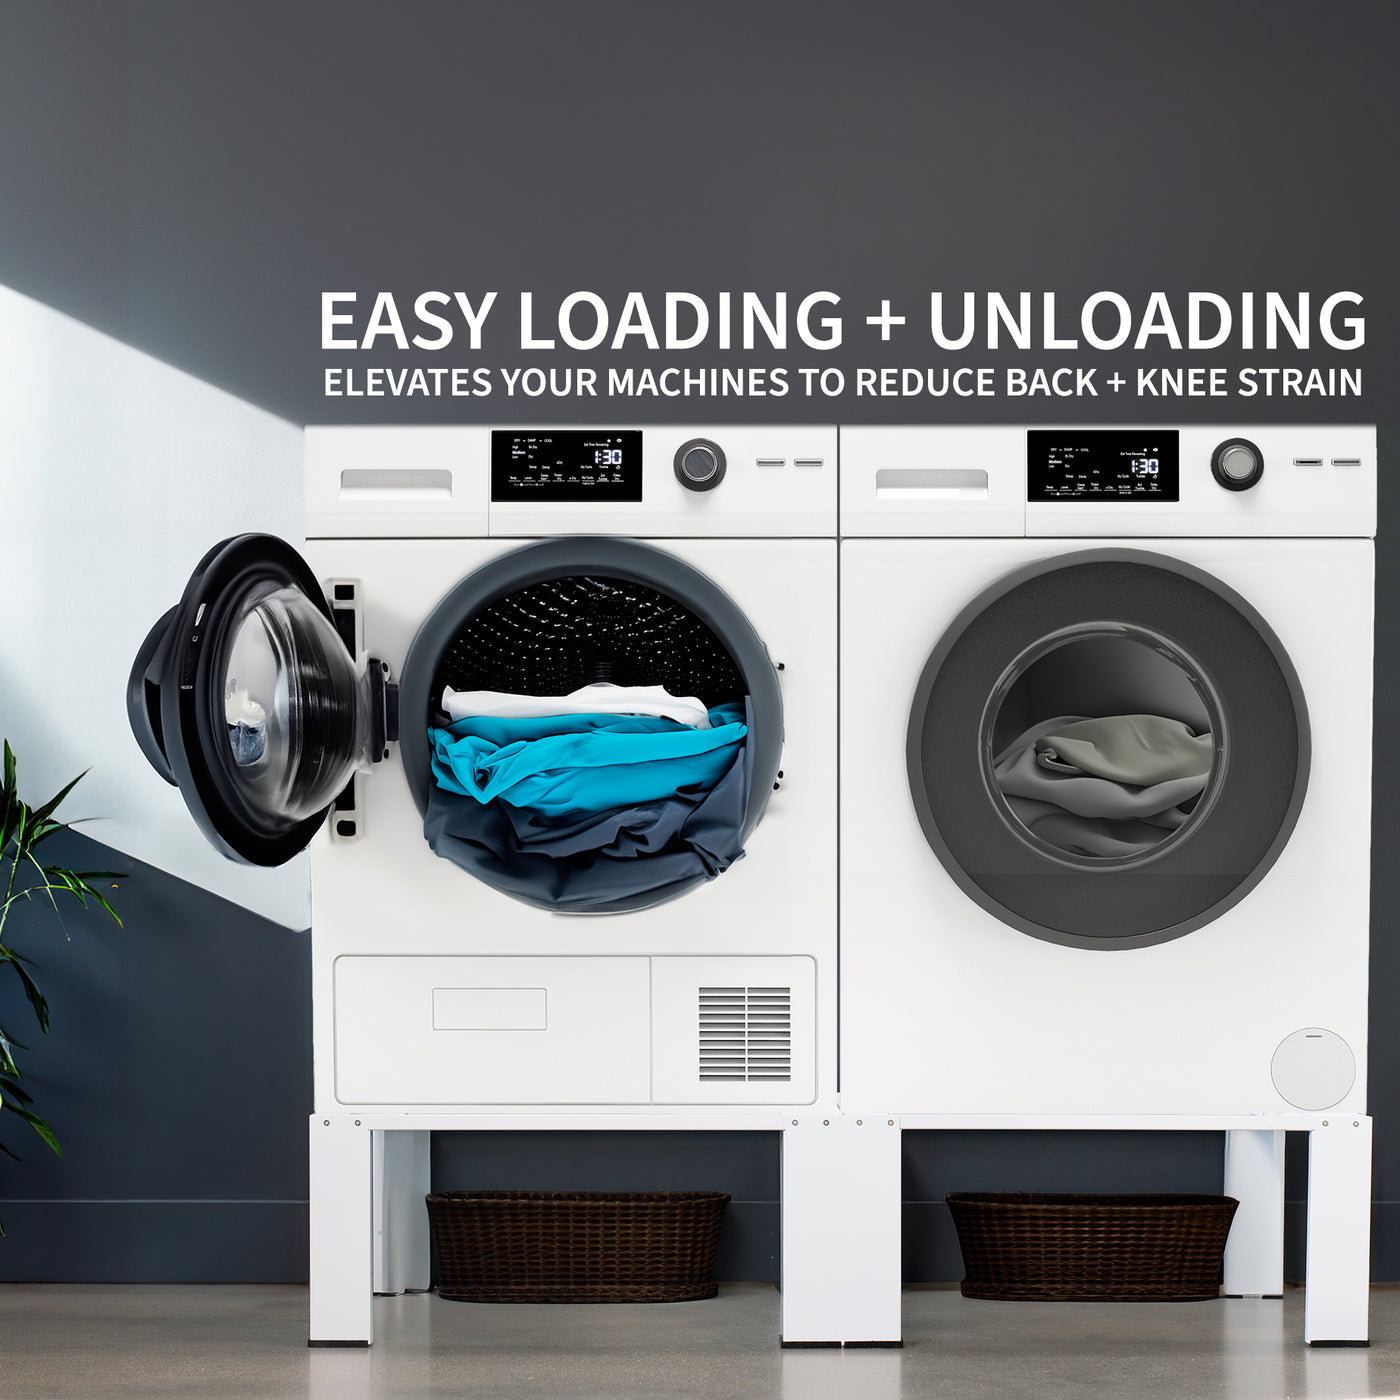 Washer and dryer pedestal raises your washer and dryer for easy access and underneath storage.